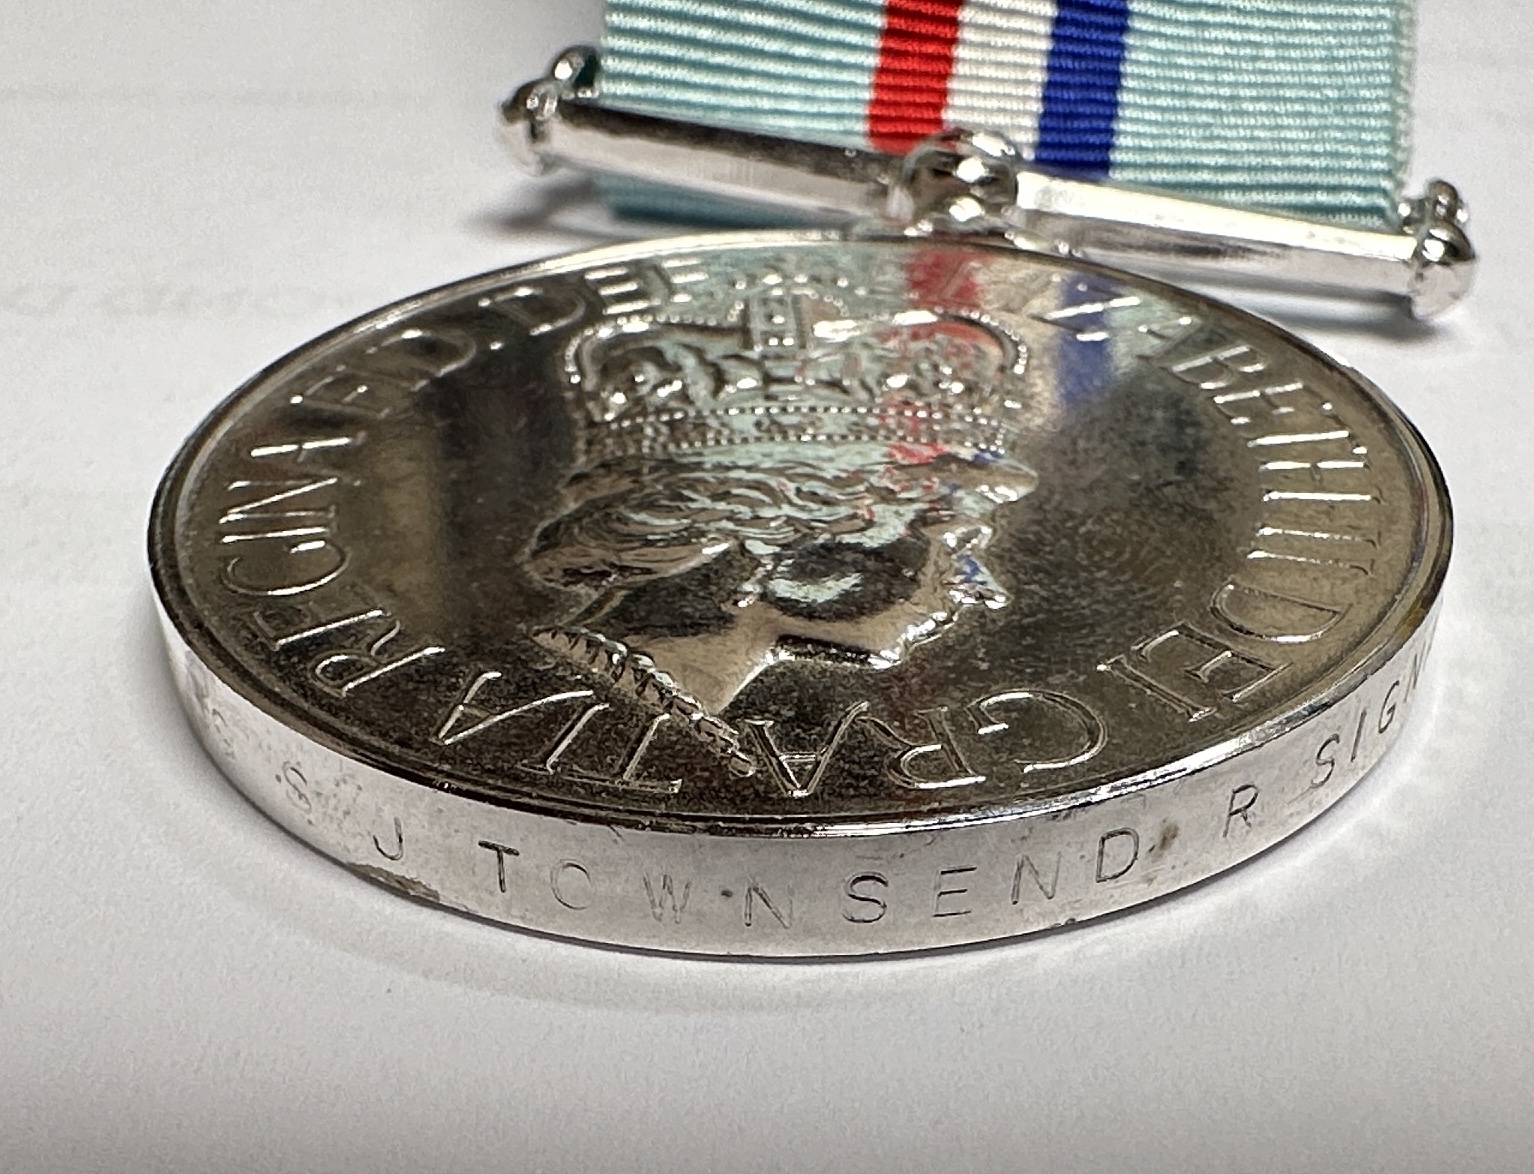 The Rhodesia Medal 1980 to '24442182 Sig S.J. Townsend. R. Signals,' together with The Zimbabwe - Image 7 of 8